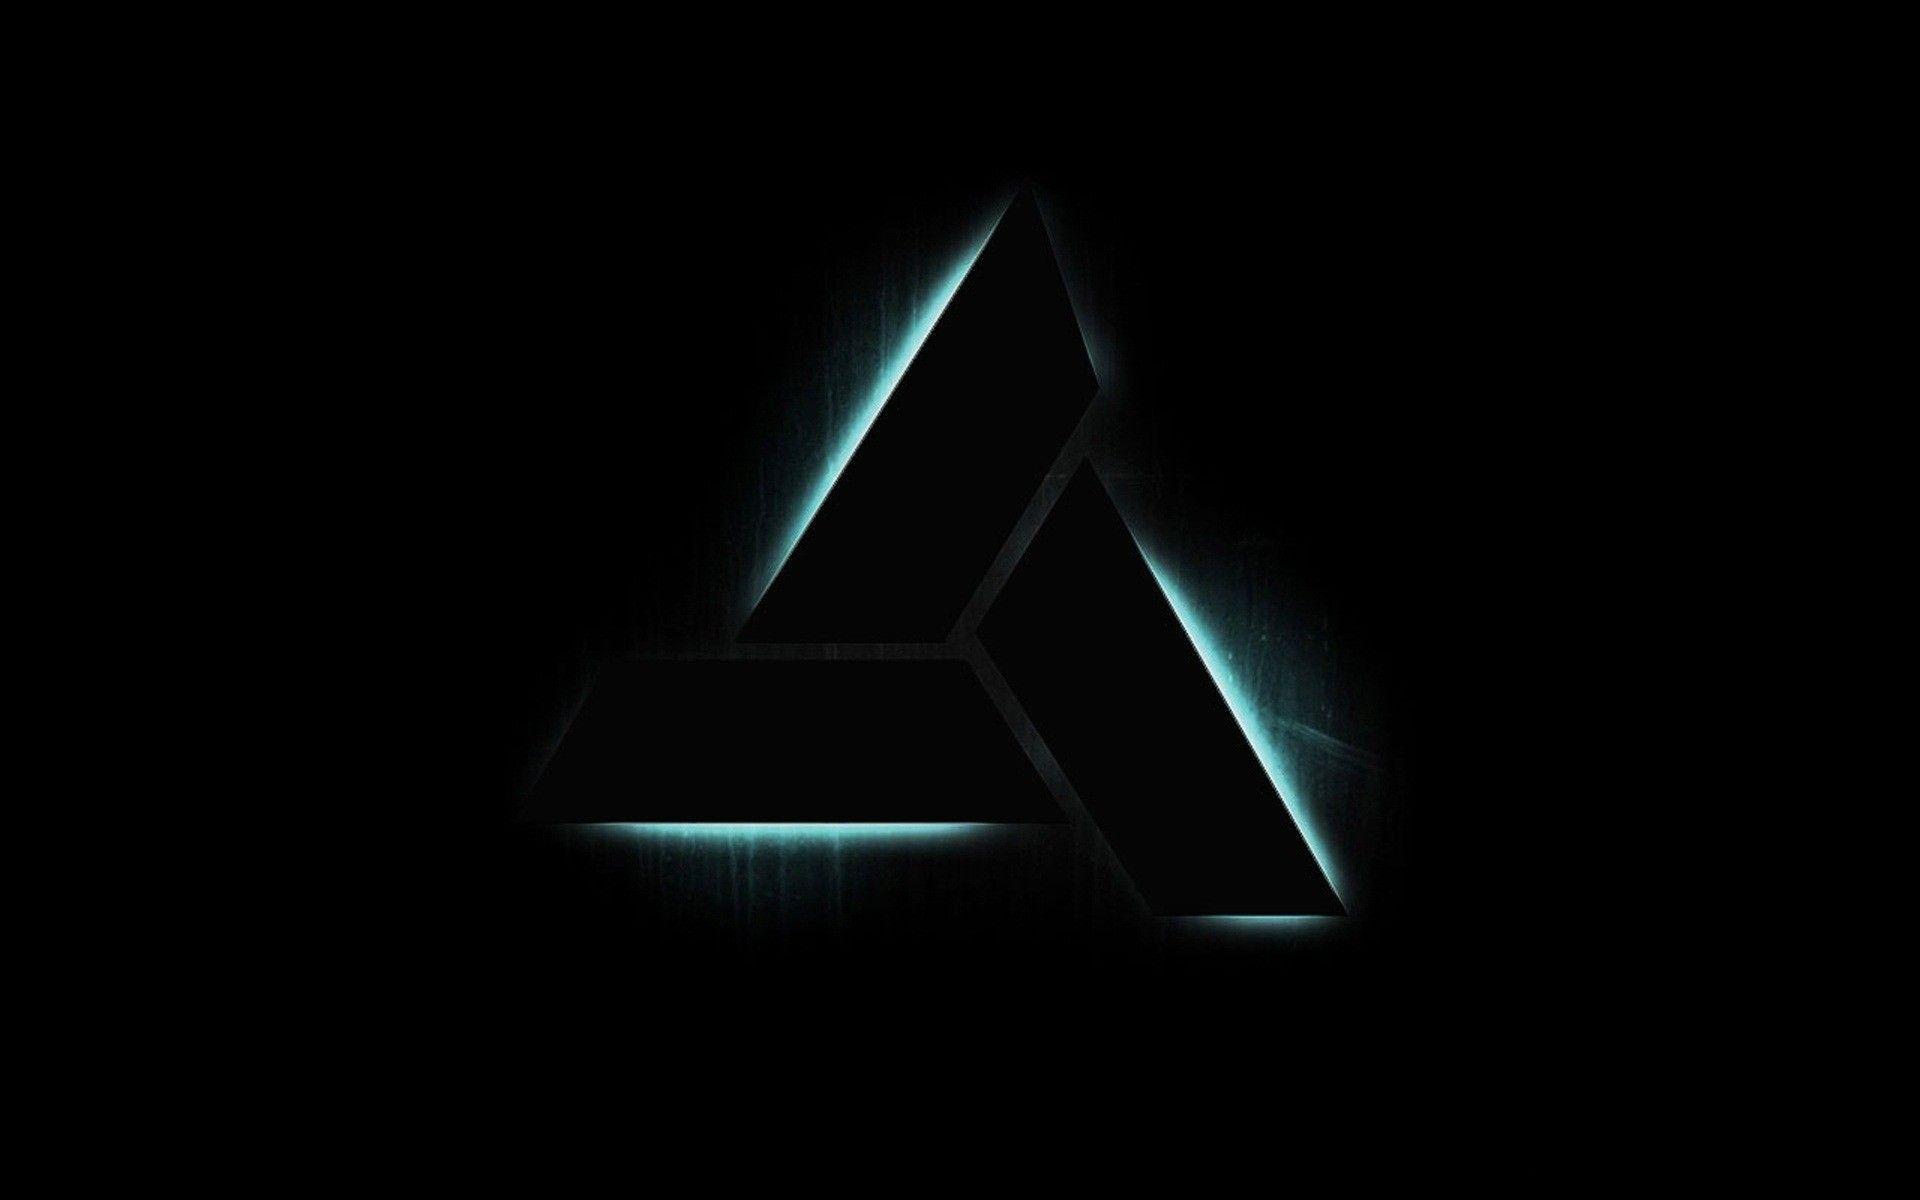 Cool Triangle Logo - Watch Dogs Fox Logo Wallpaper Photo Is Cool Wallpaper. 欲しいもの